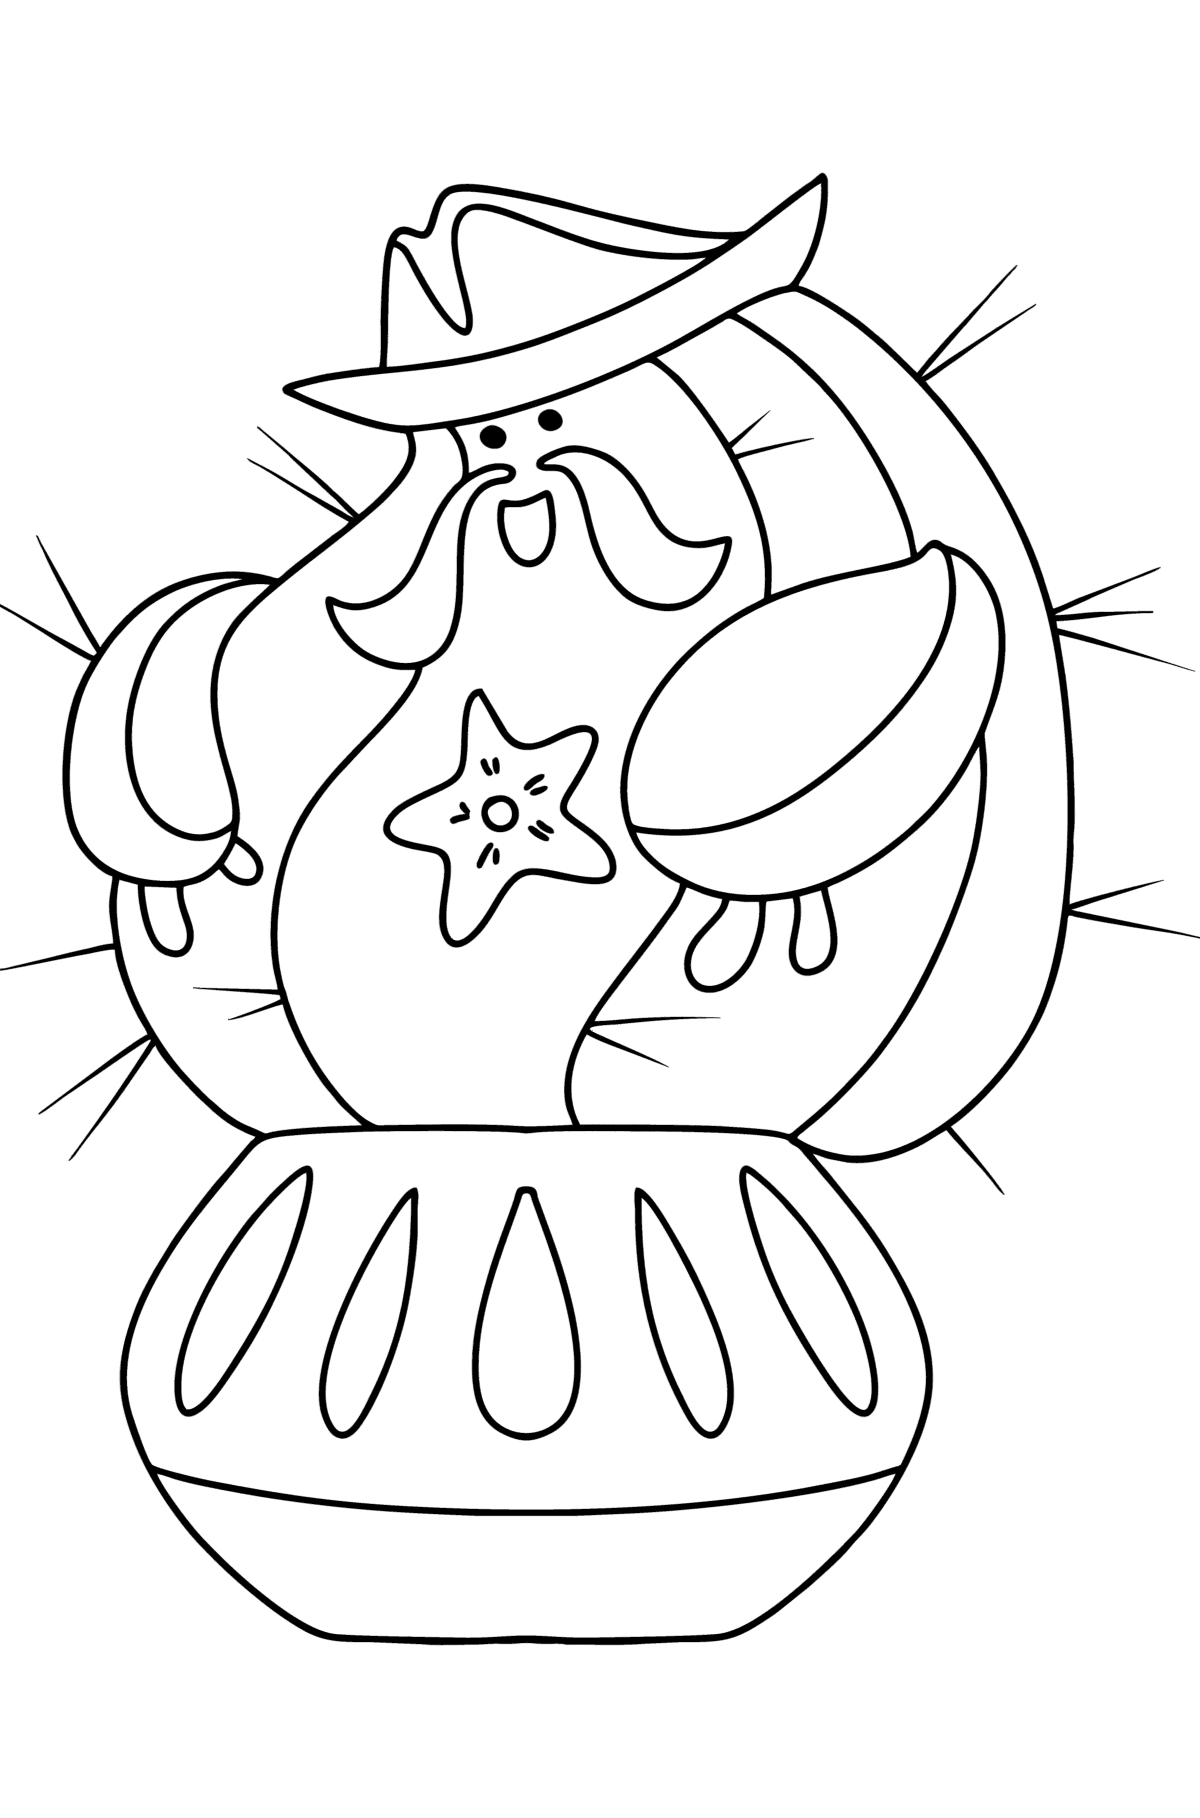 Sheriff Cactus coloring page - Coloring Pages for Kids